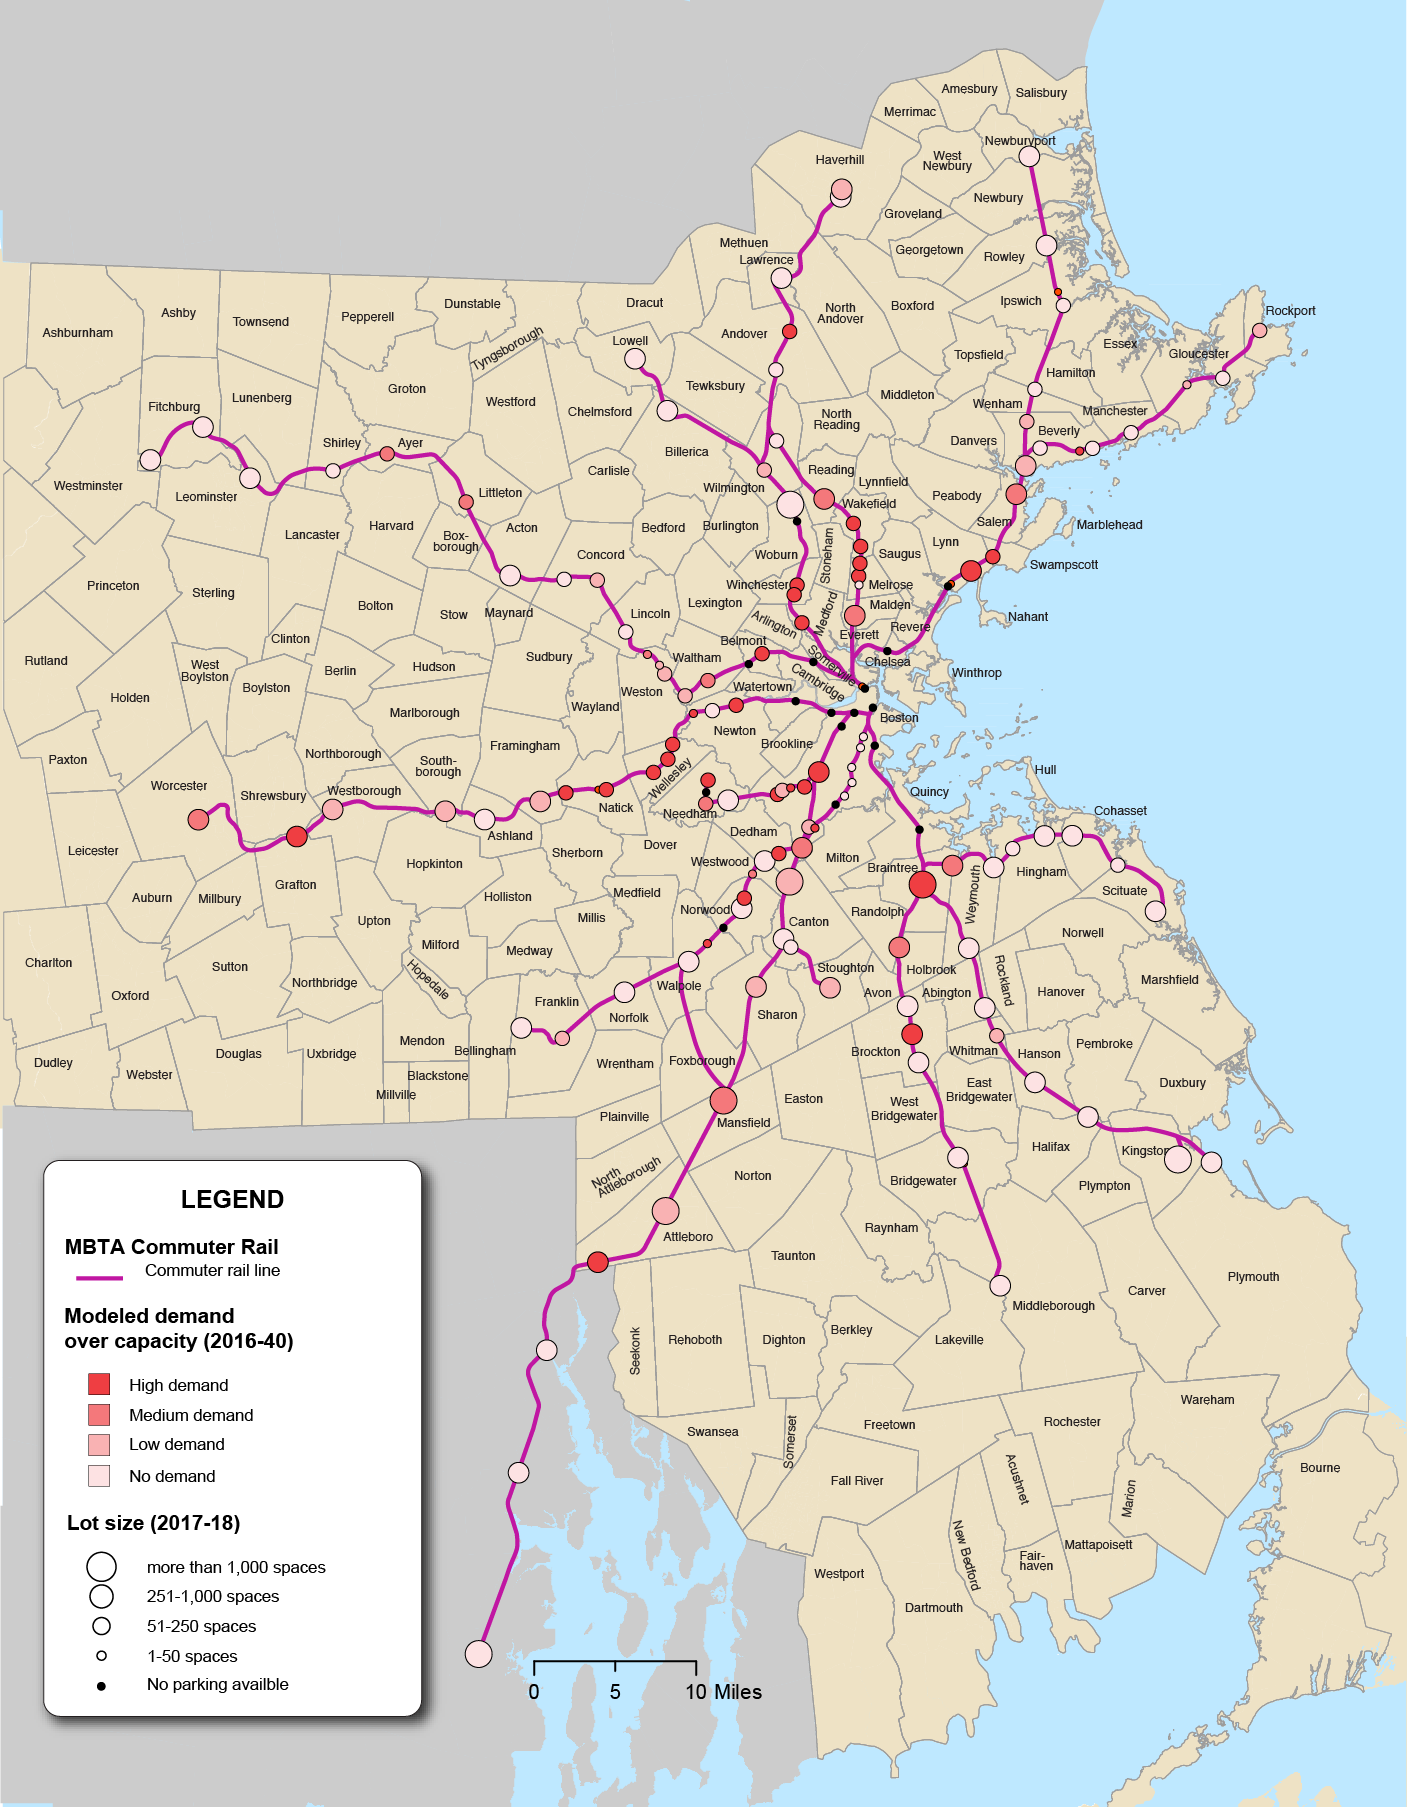 Figure 6-13 is a map of the Boston Region with MBTA Commuter Rail Lines. Figure 6-13 also shows points reflecting the Modeled Demand Over Capacity and Parking Lot Size together. 